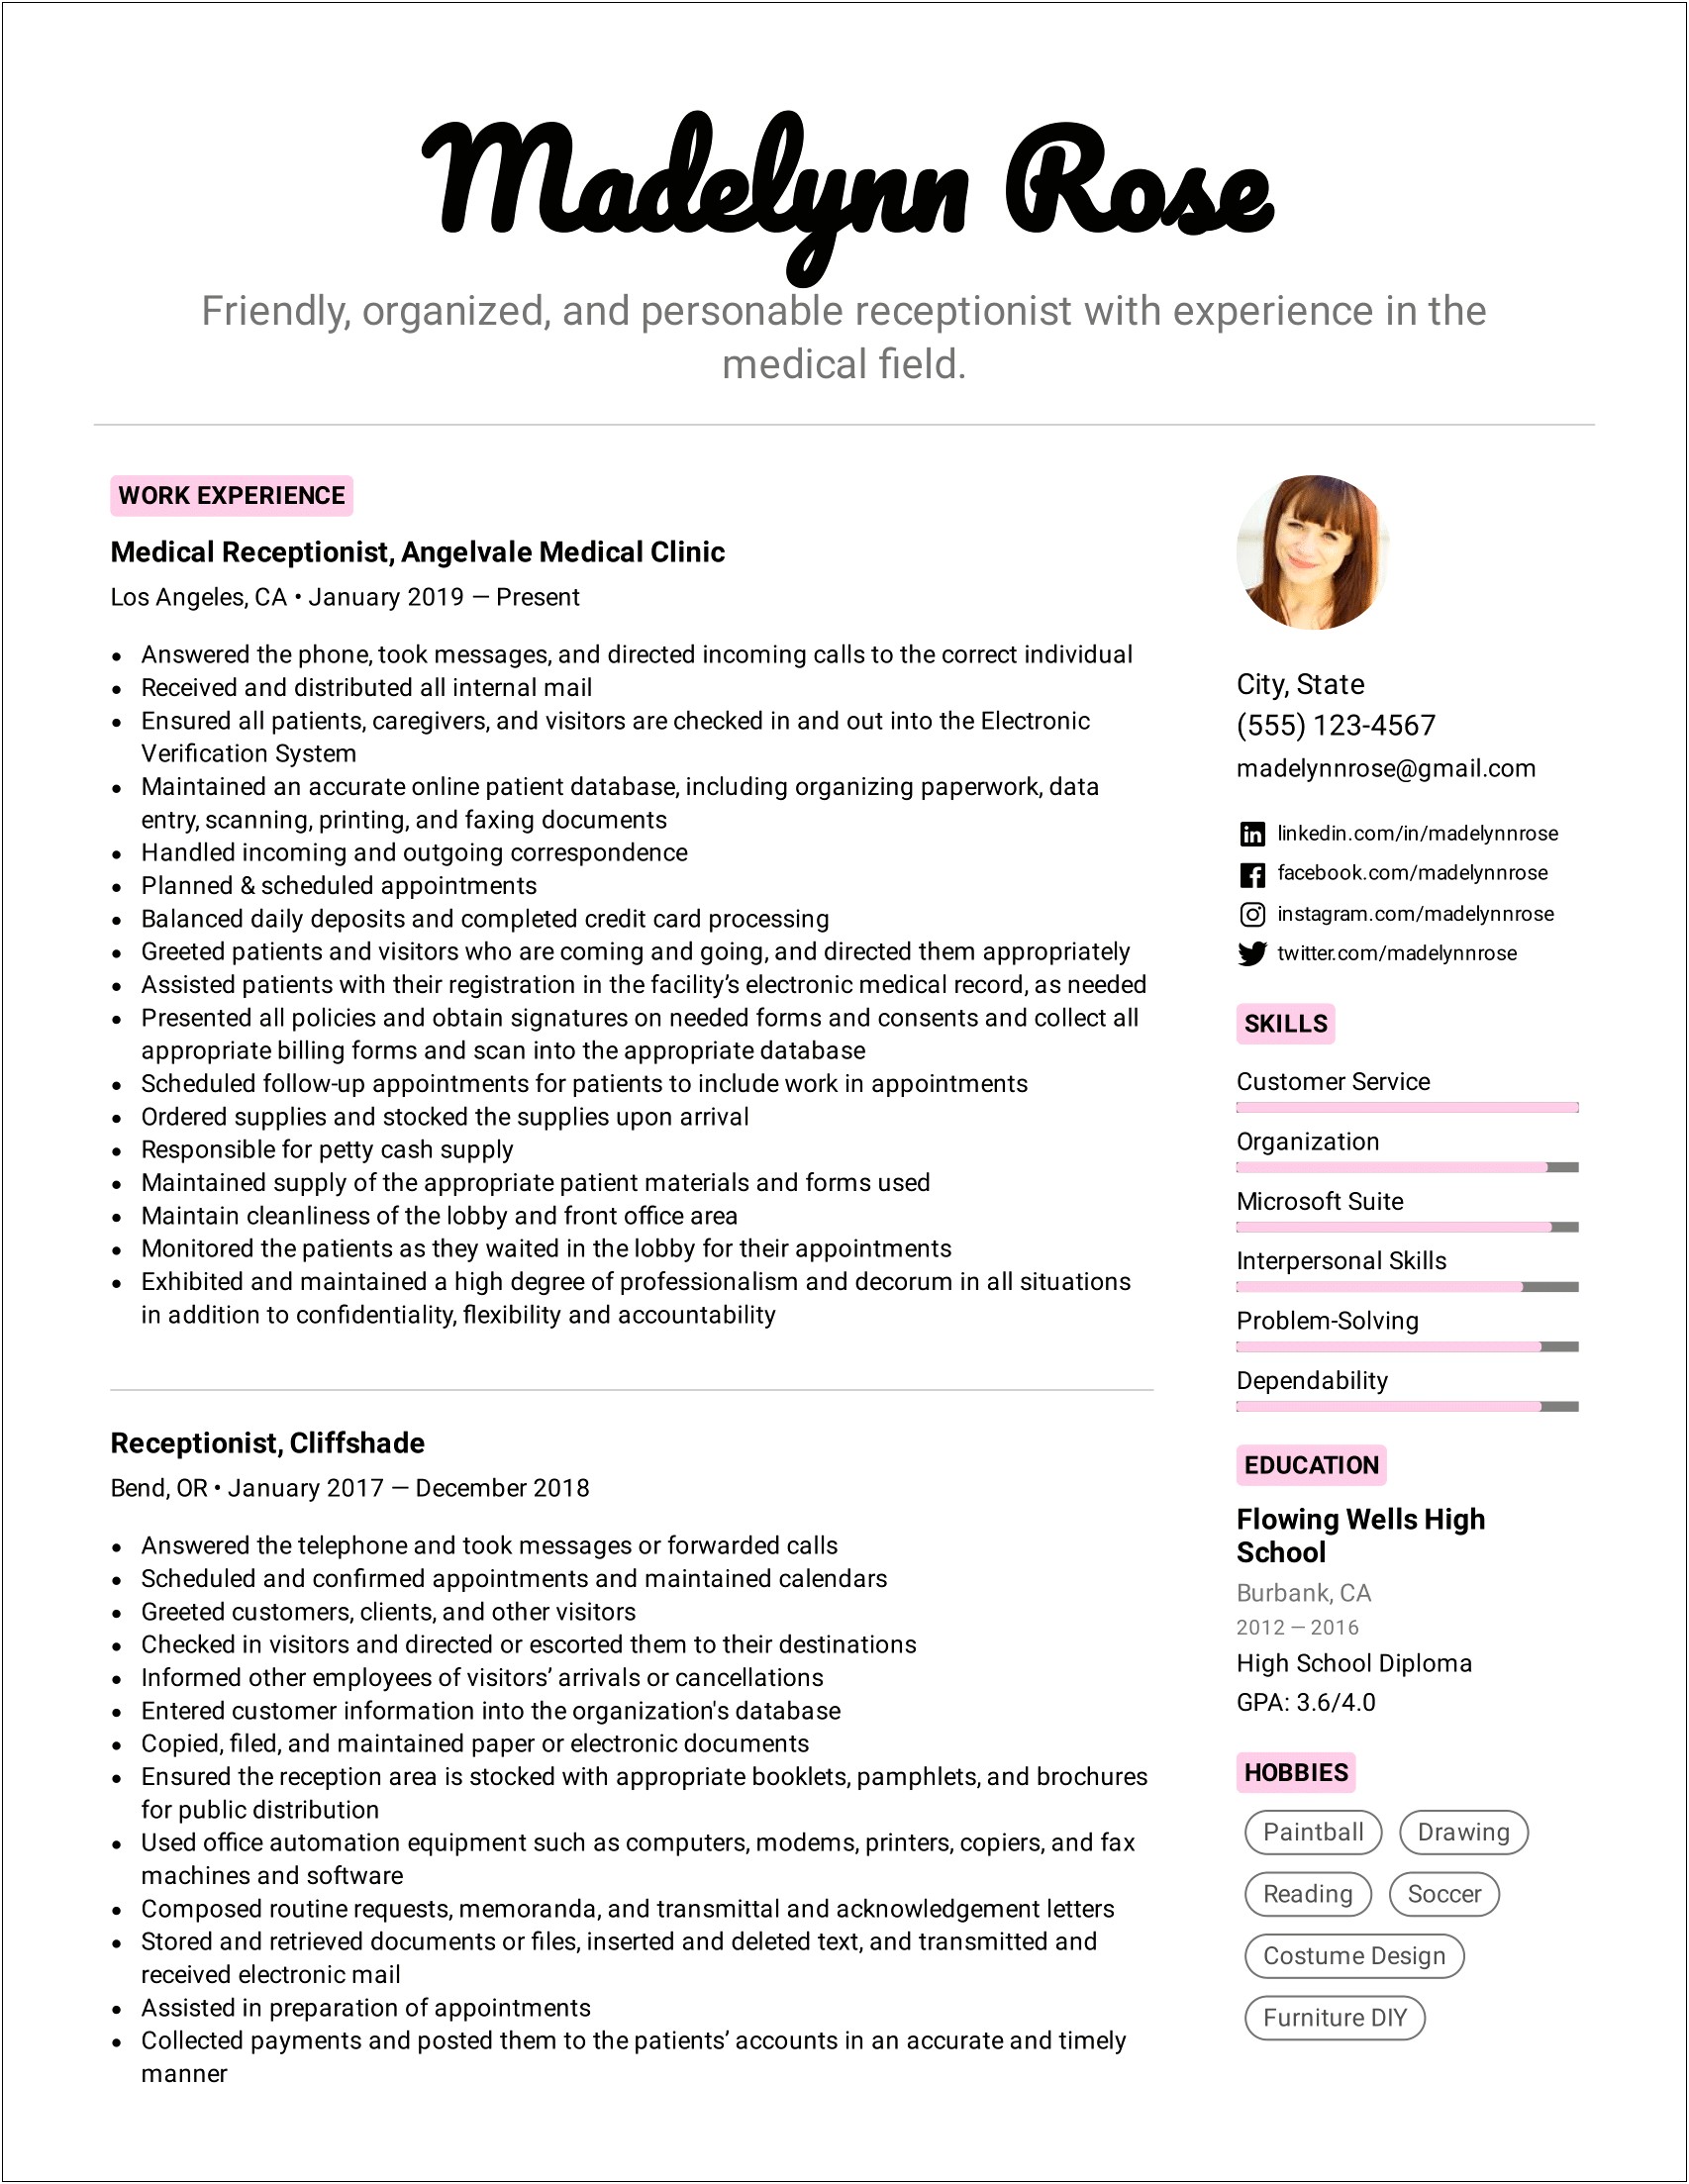 Resume Career Overview Example For Medical Receptionist